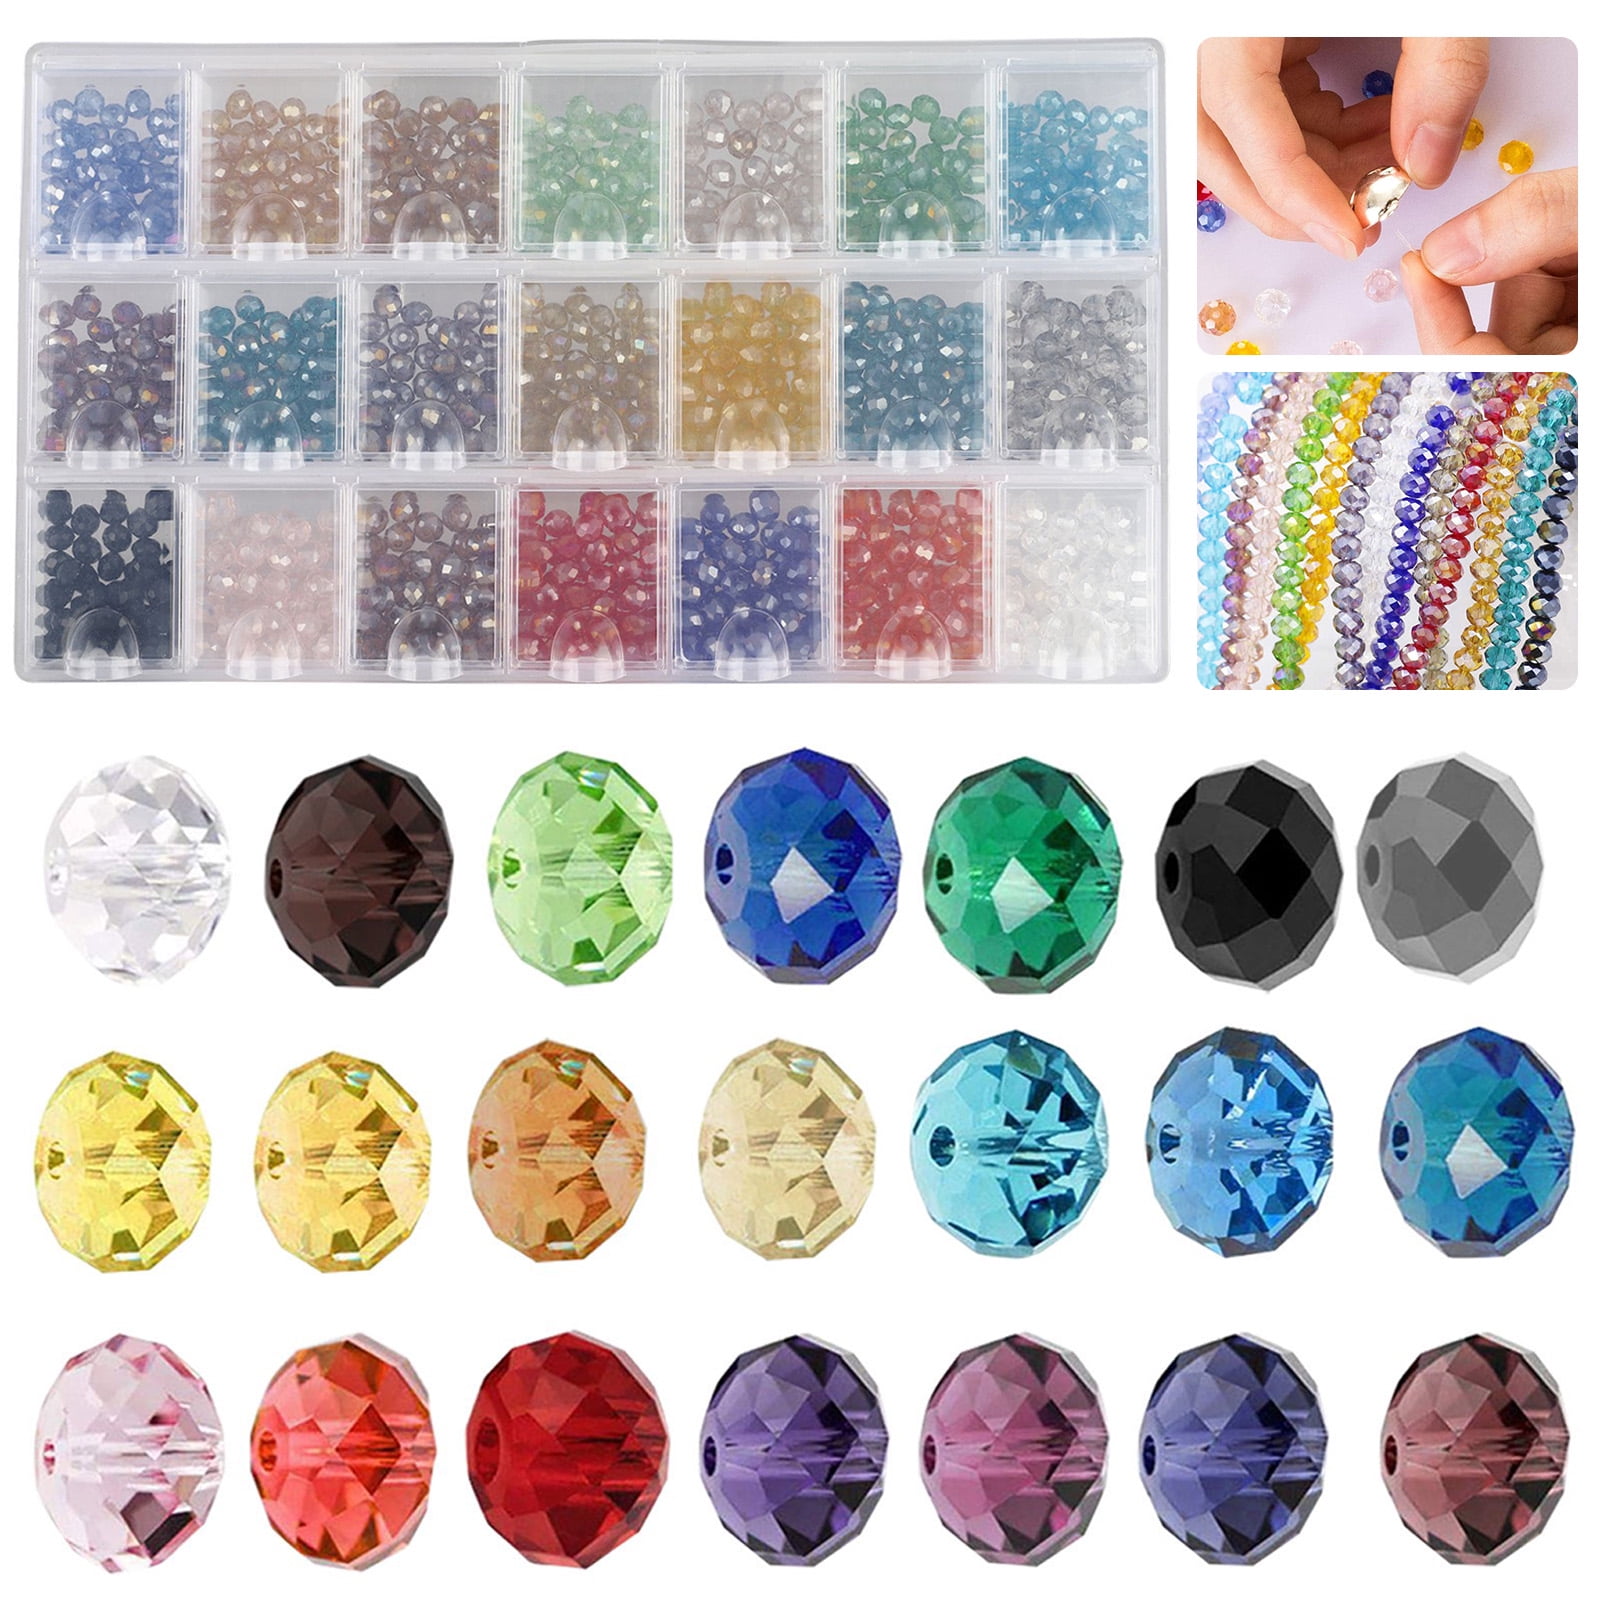 1200PCS 6mm Glass Beads for Jewelry Making Bracelets, 24 Colors Crystal  Beads Round Beads Bracelet Making Kit DIY Craft for Girl Women